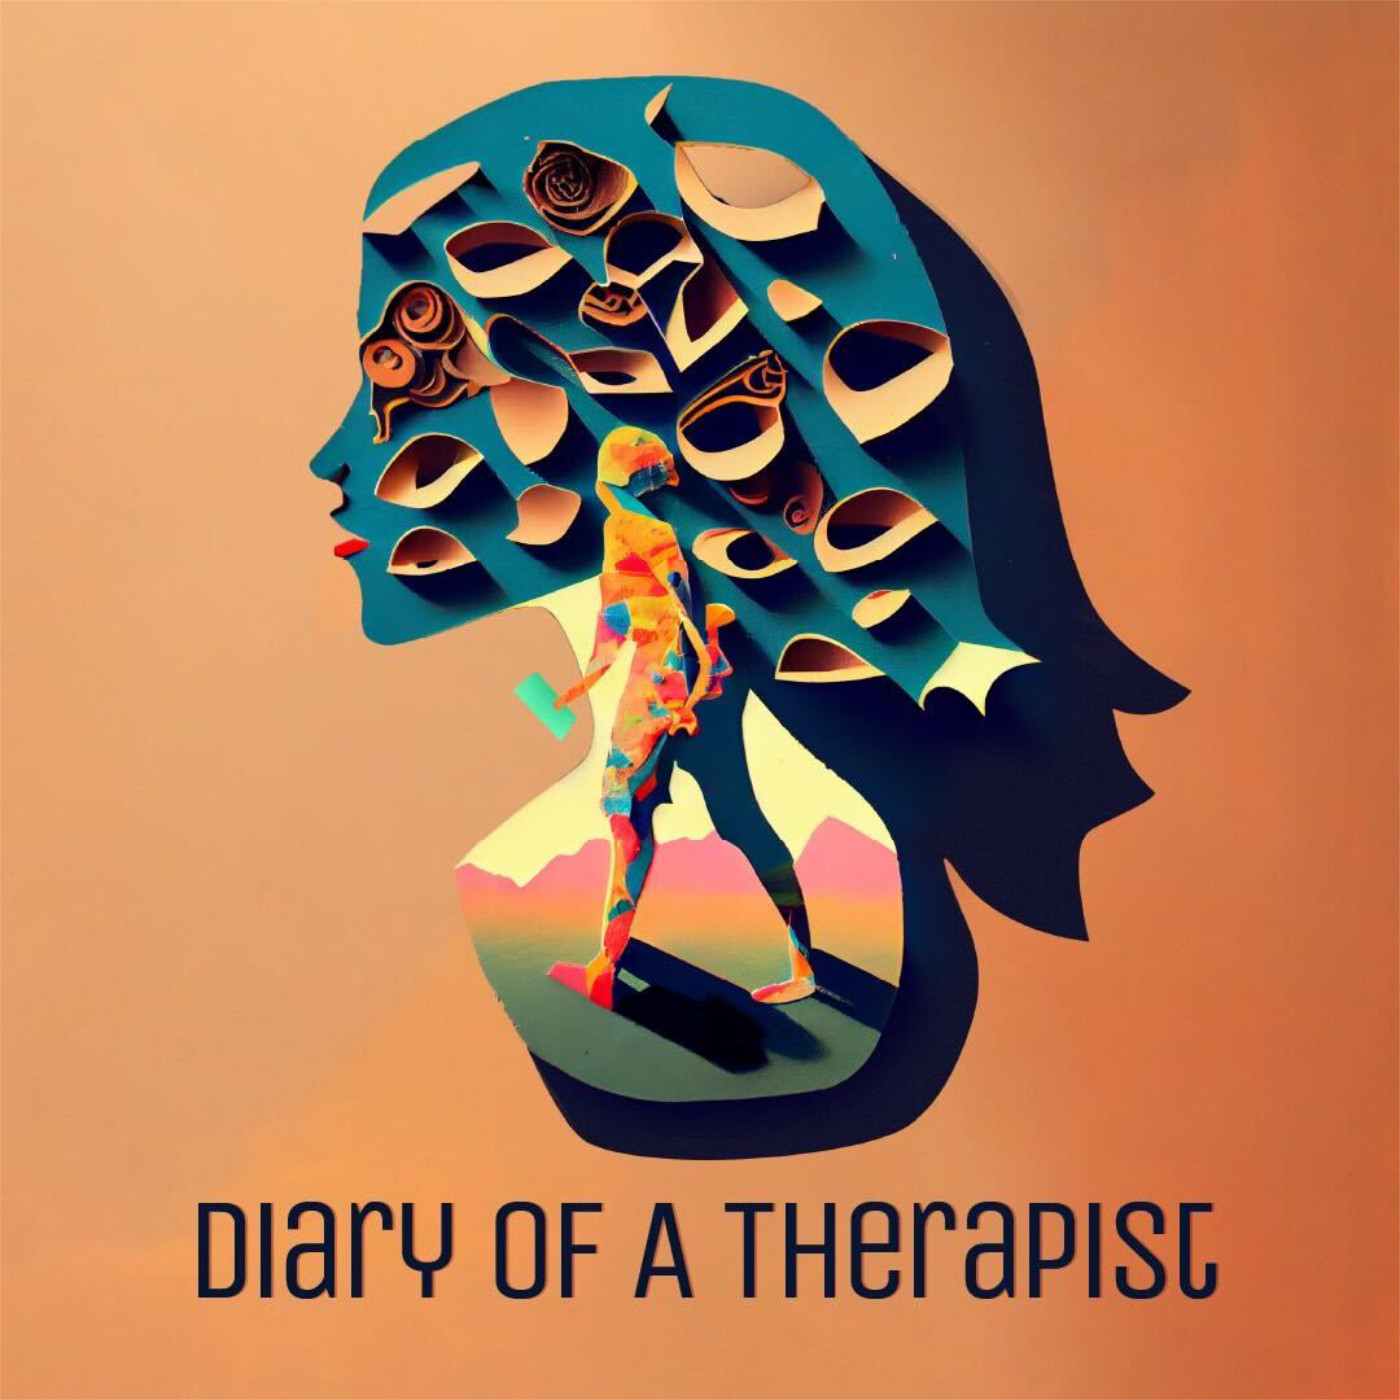 Diary of a Therapist